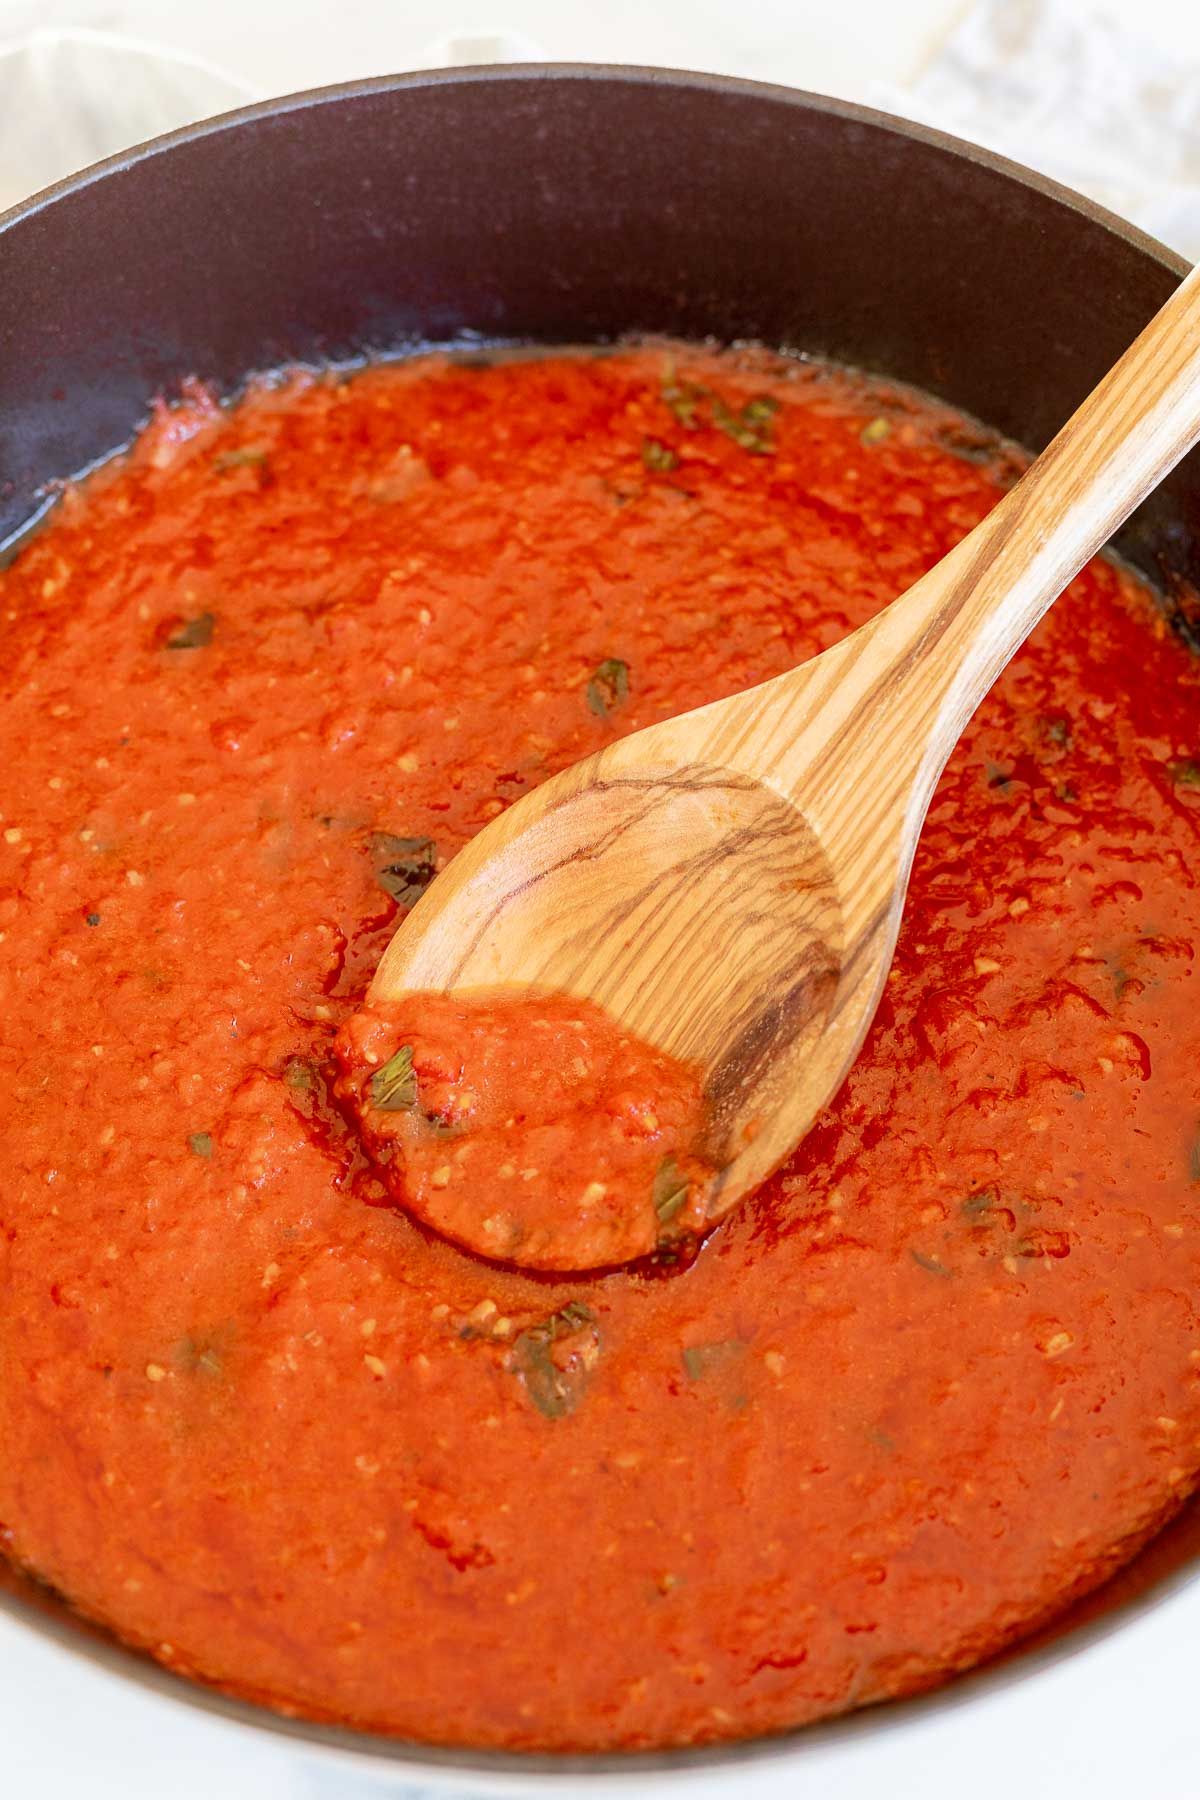 San Marzano tomato sauce in a cast iron pan, topped with chopped herbs and a wooden spoon